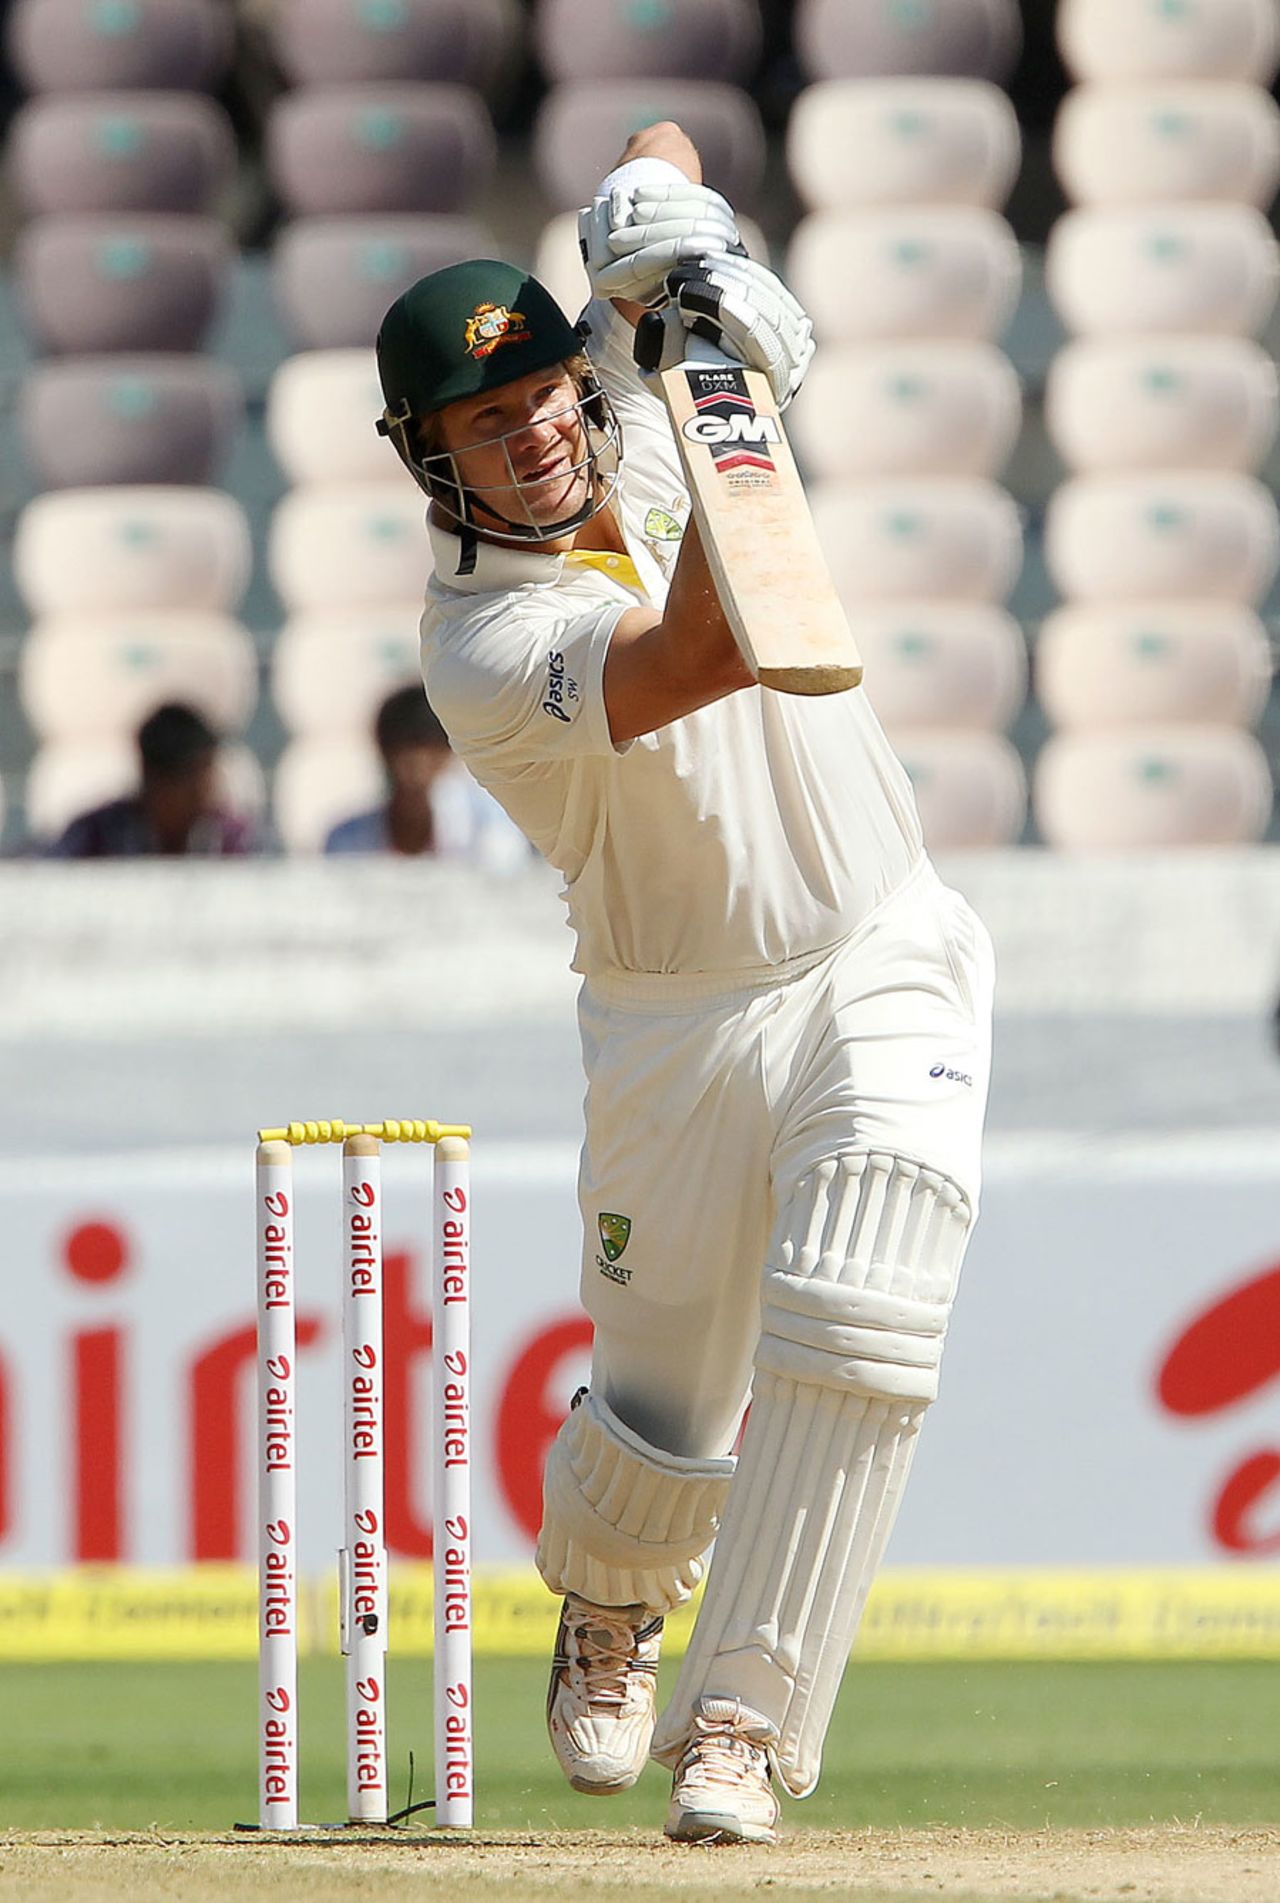 Shane Watson lofts one down the ground, India v Australia, 2nd Test, Hyderabad, 1st day, March 2, 2013